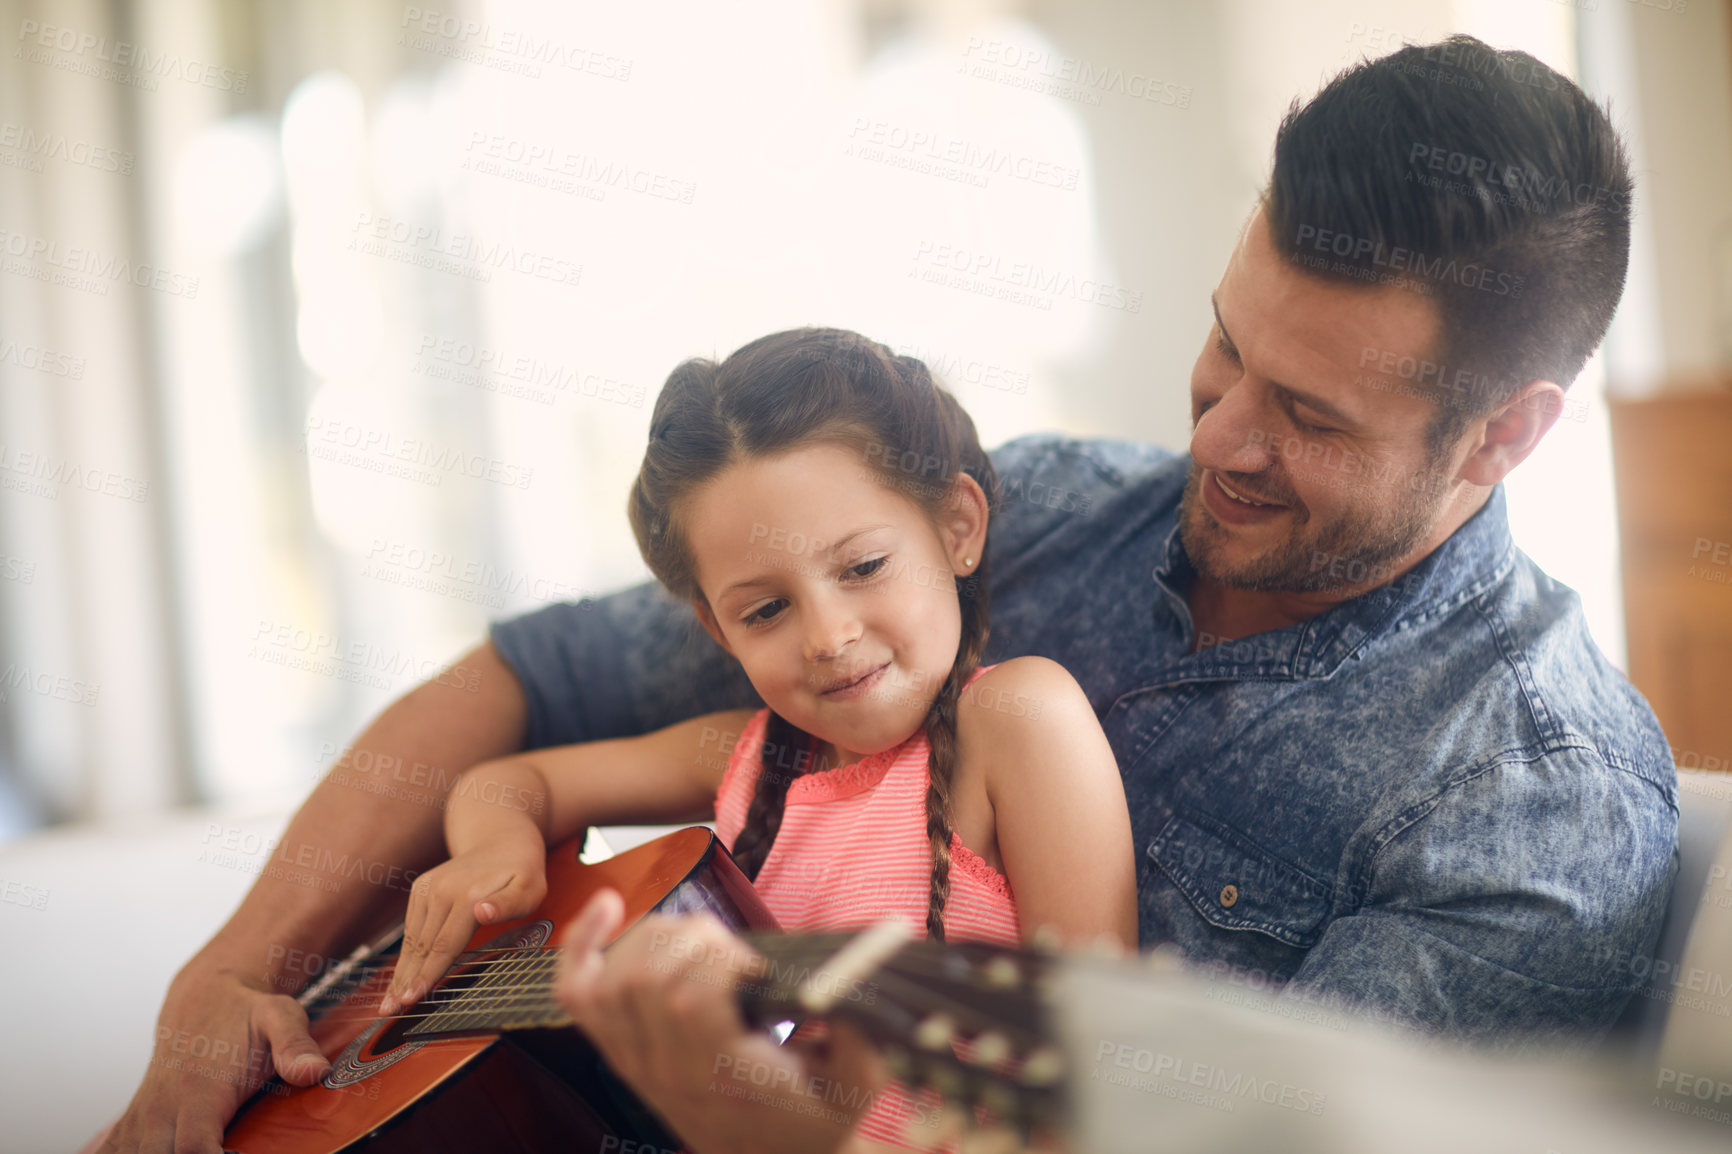 Buy stock photo Shot of a father and daughter spending time together at home